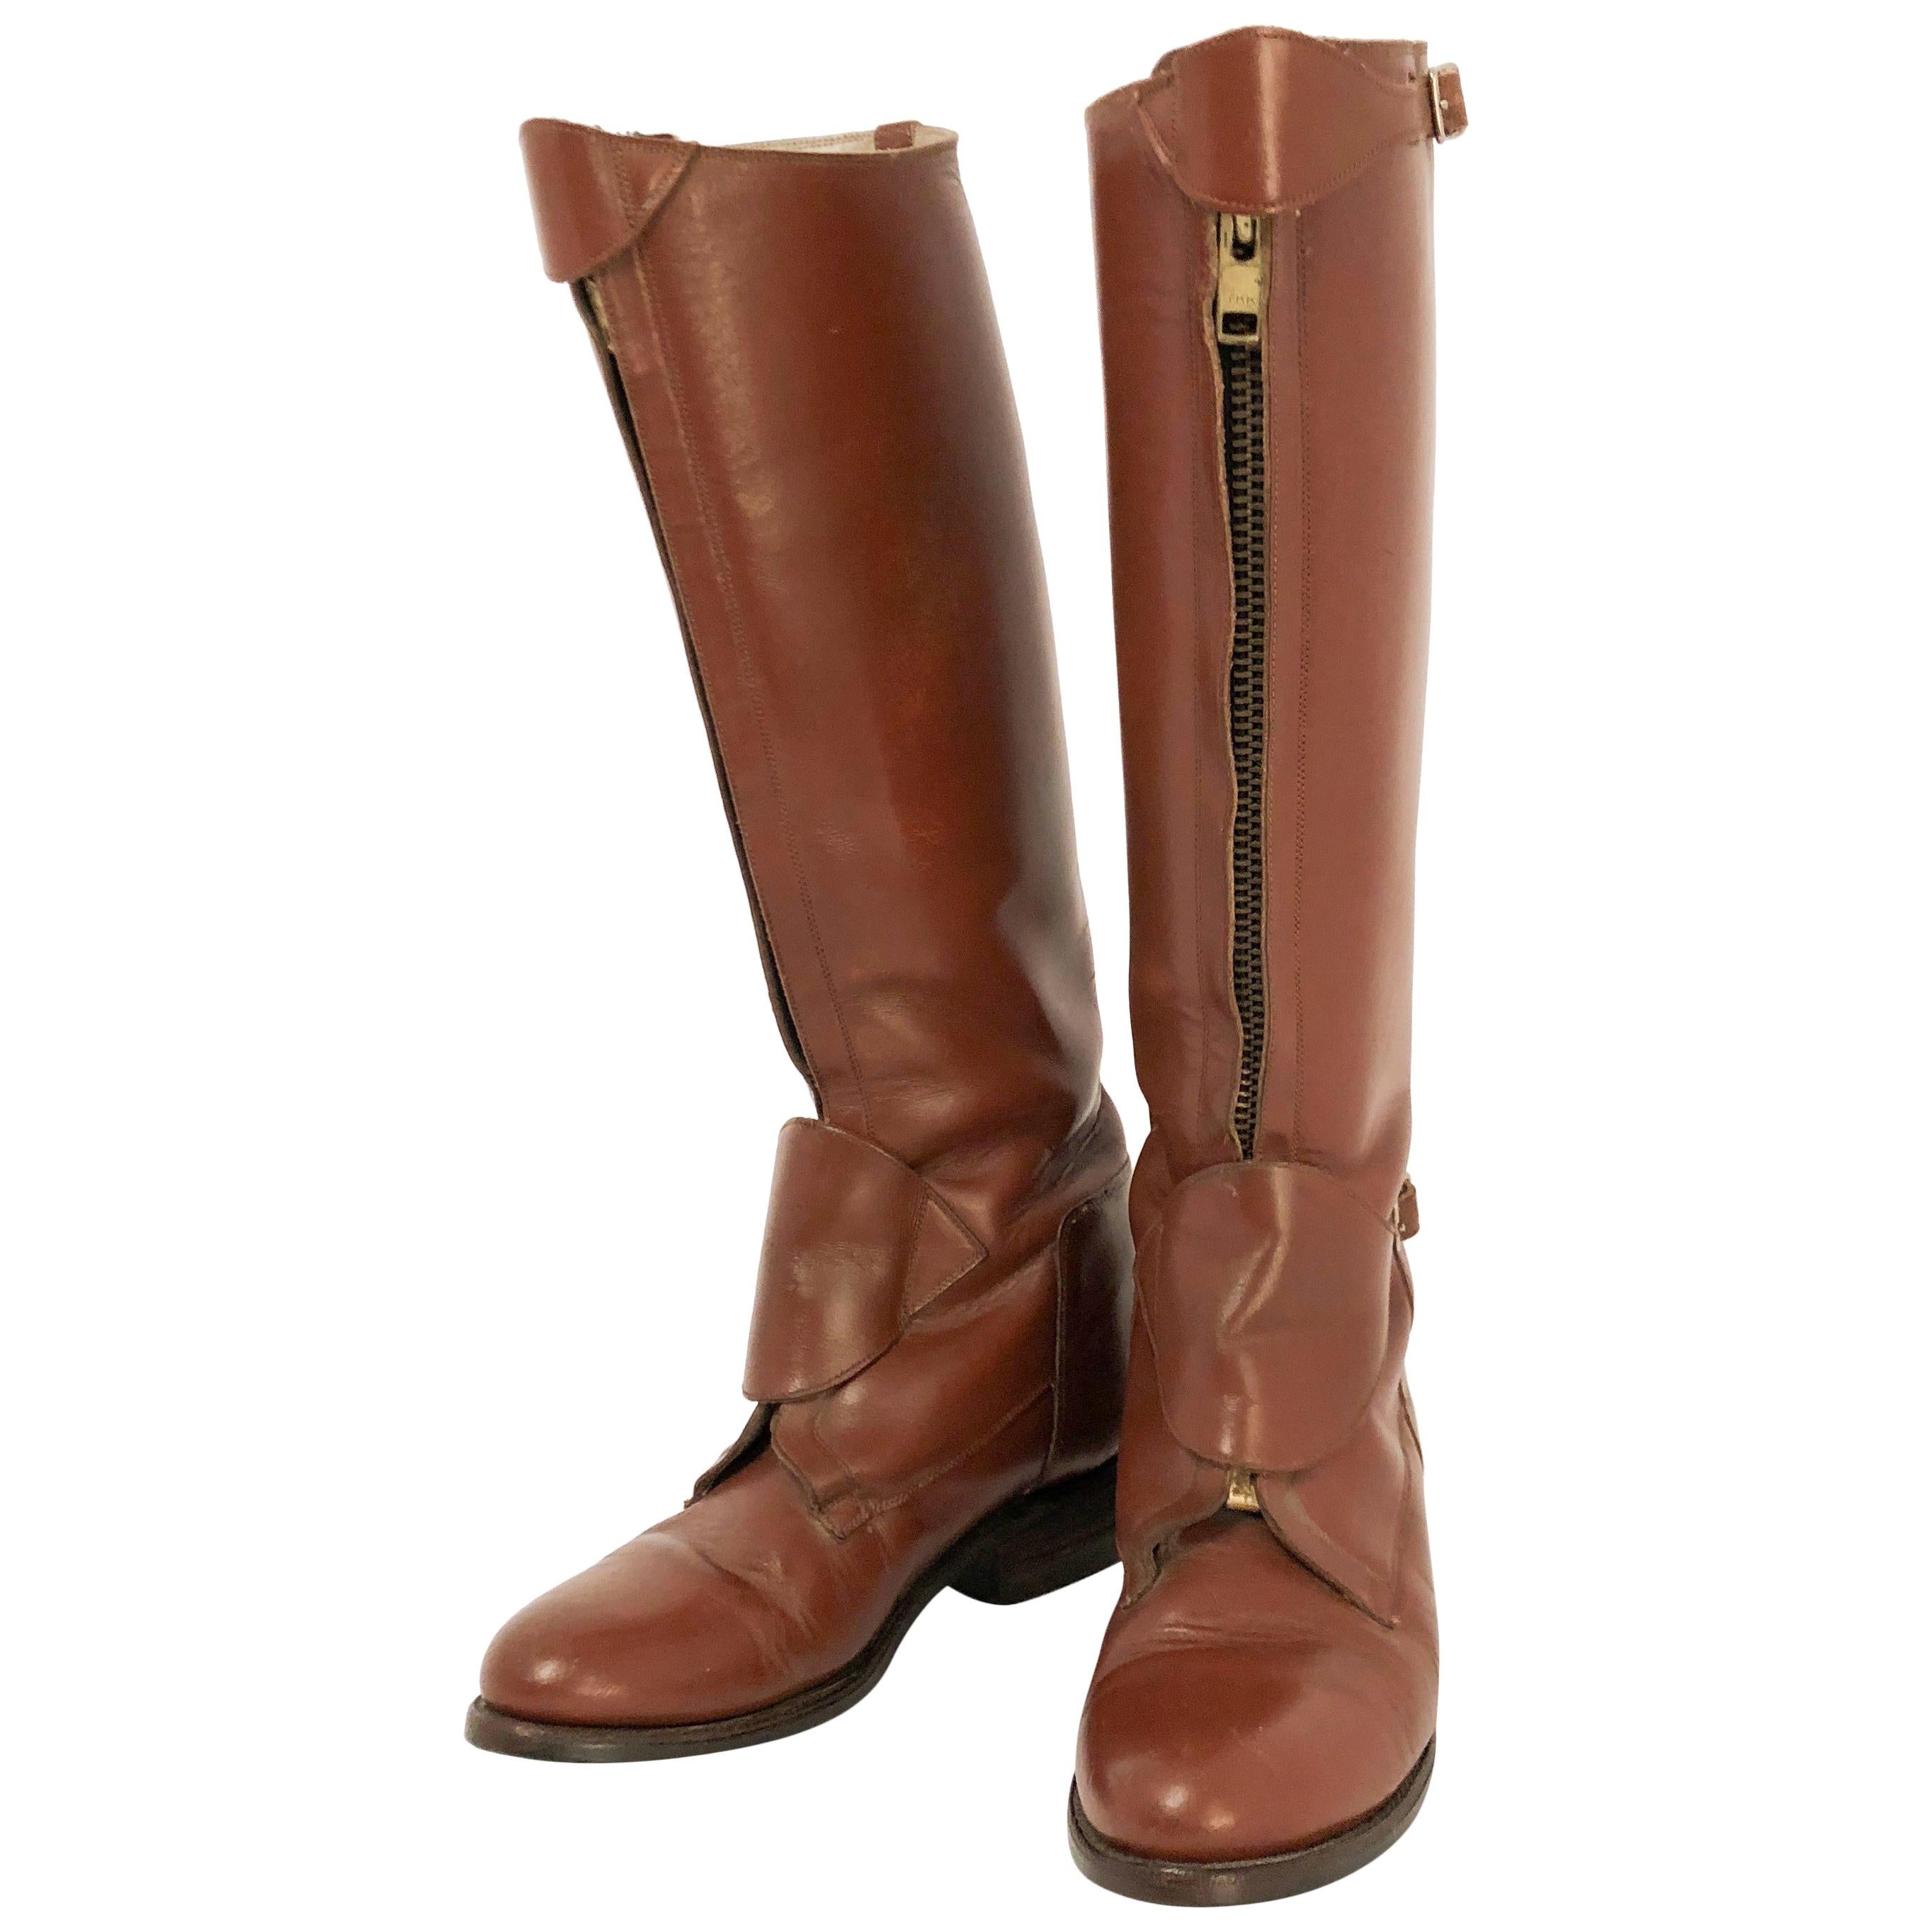 1940's Cordovan Colored Leather Riding Boots